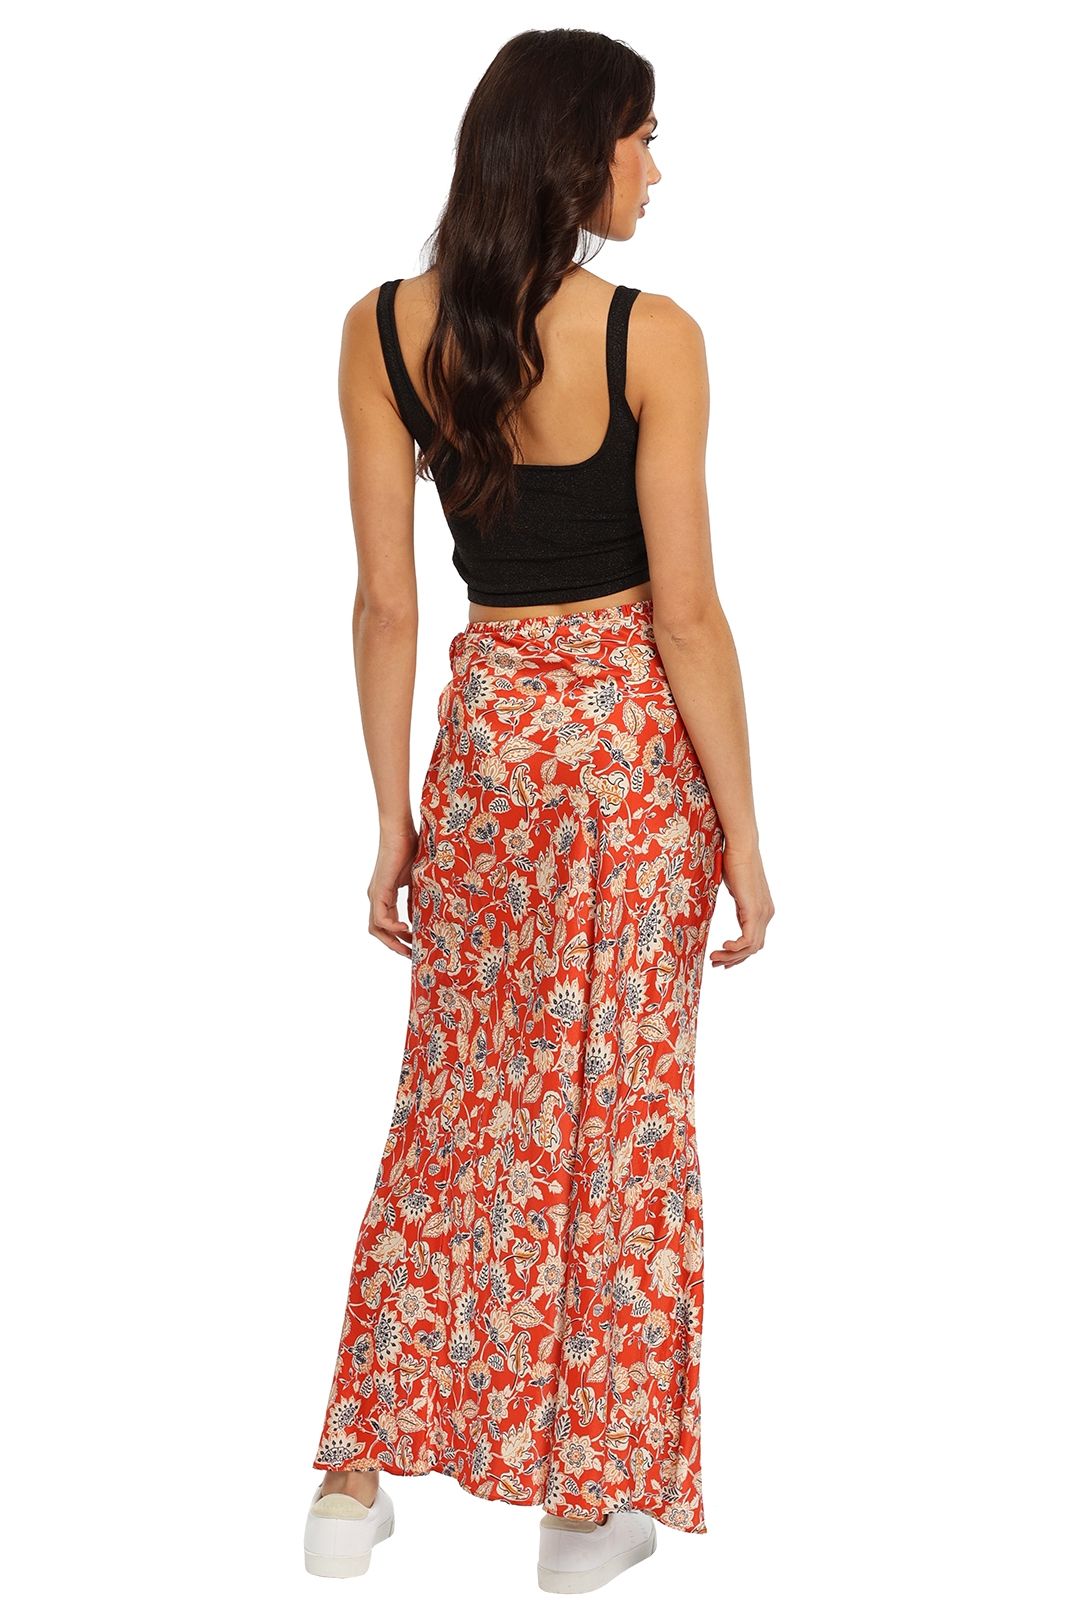 Bec and Bridge Ruby Maxi Skirt floral